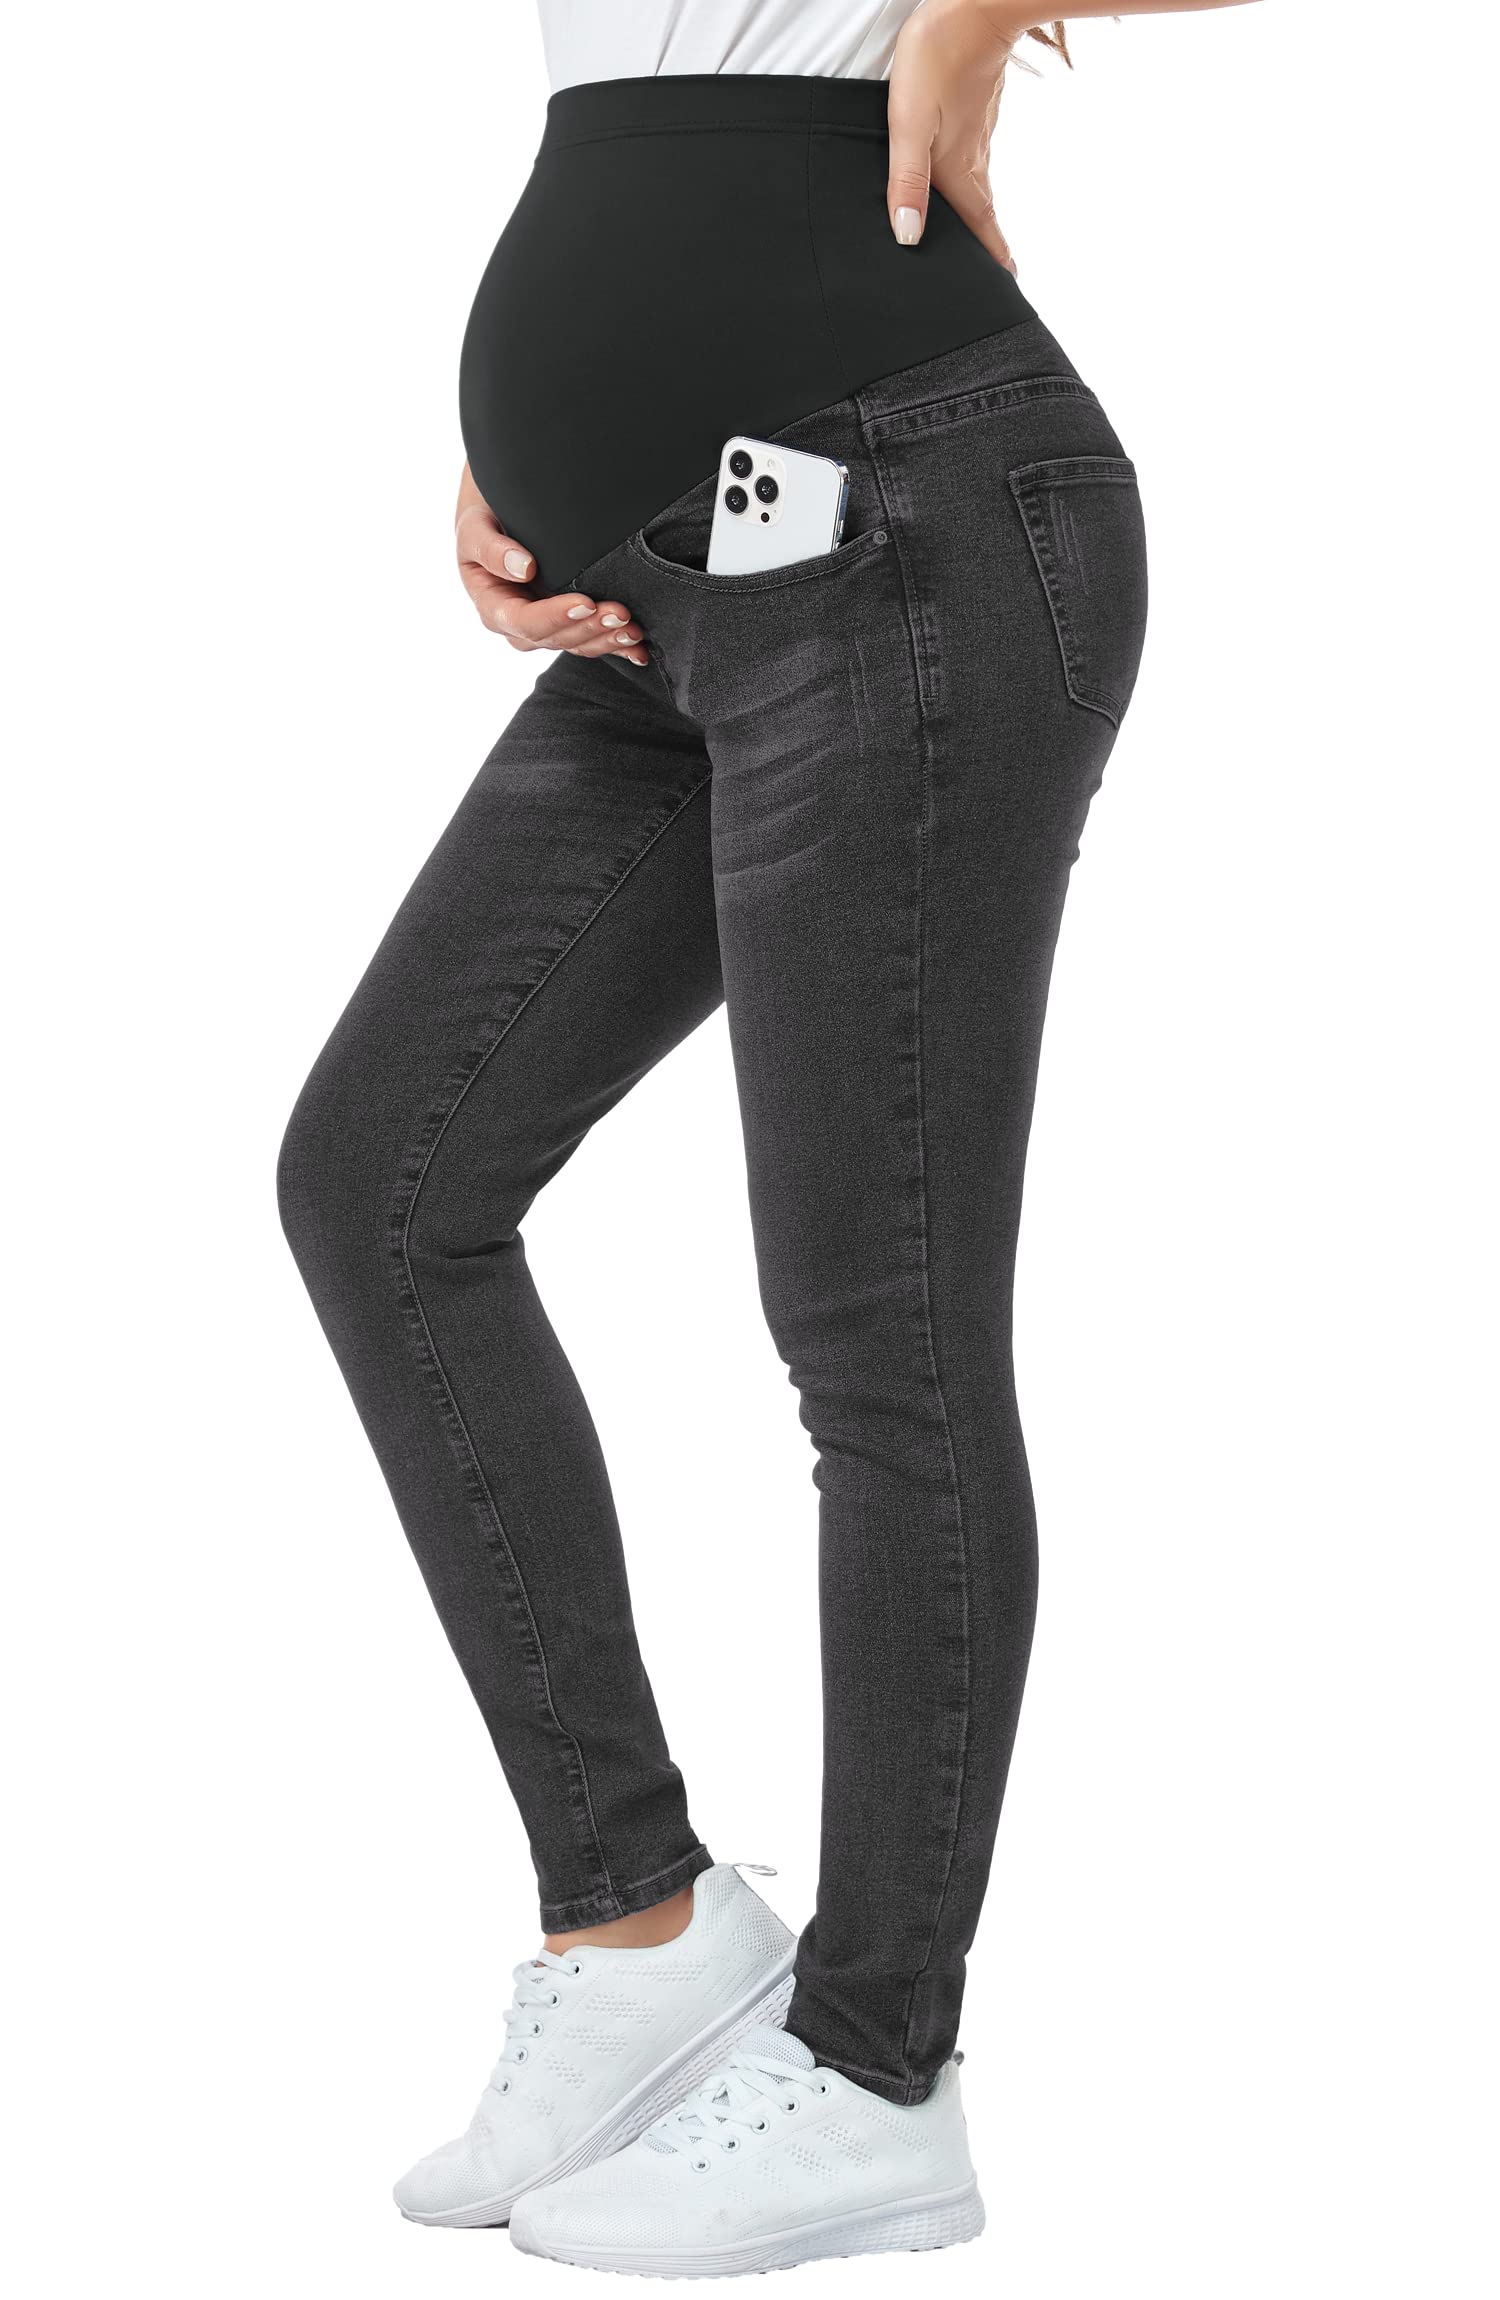 PACBREEZE Women's Maternity Jeans Over The Belly Slim Stretchy